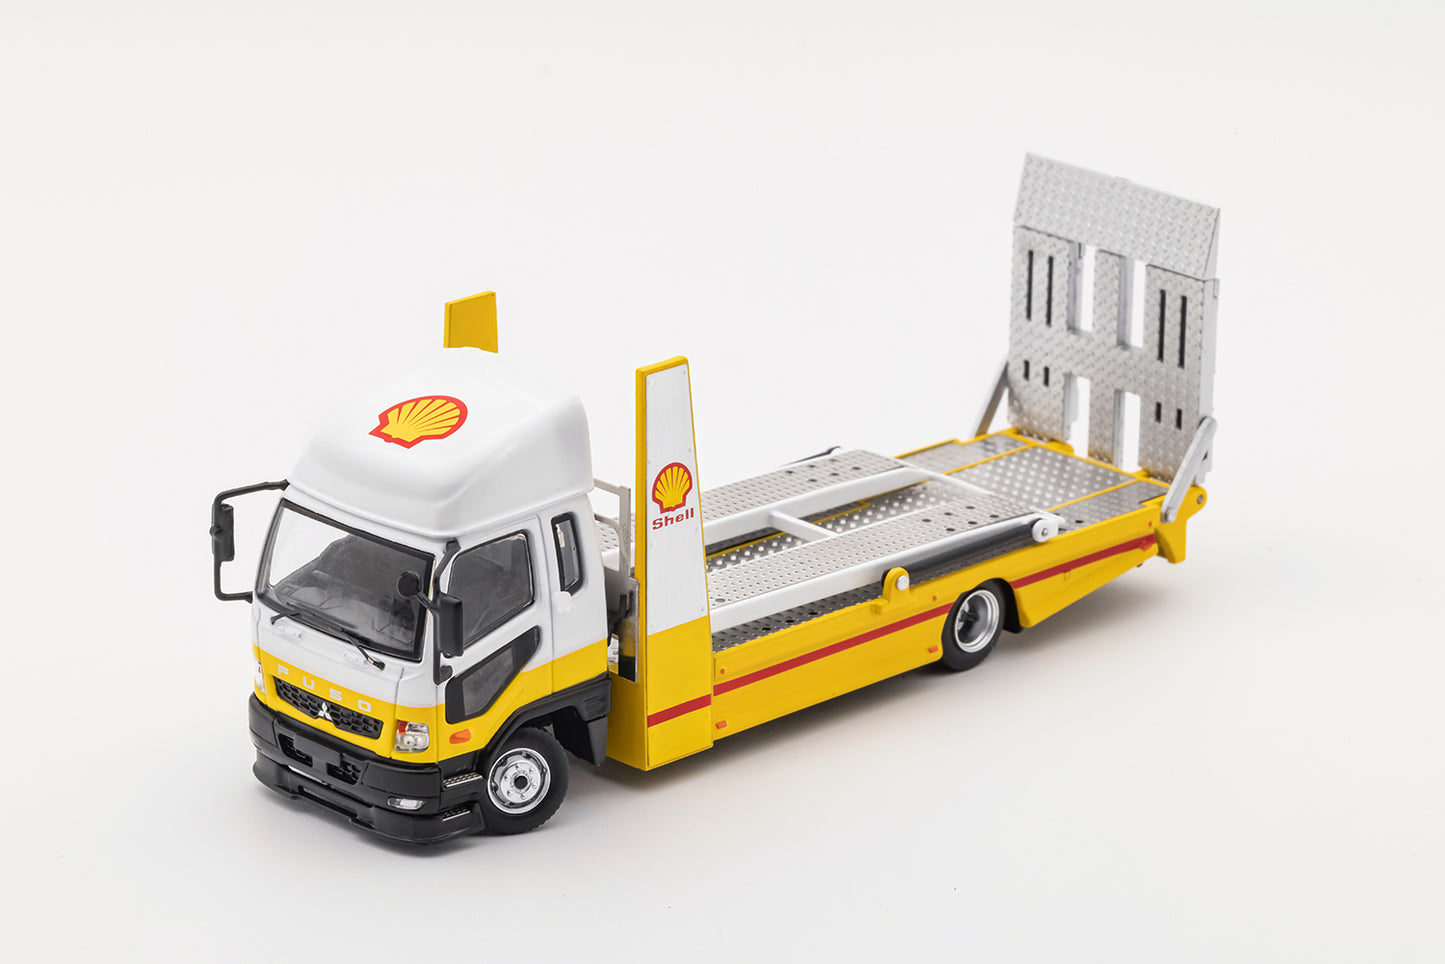 GCD 1/64 Mitsubishi Fuso Double Decker Transport Truck in Shell Livery